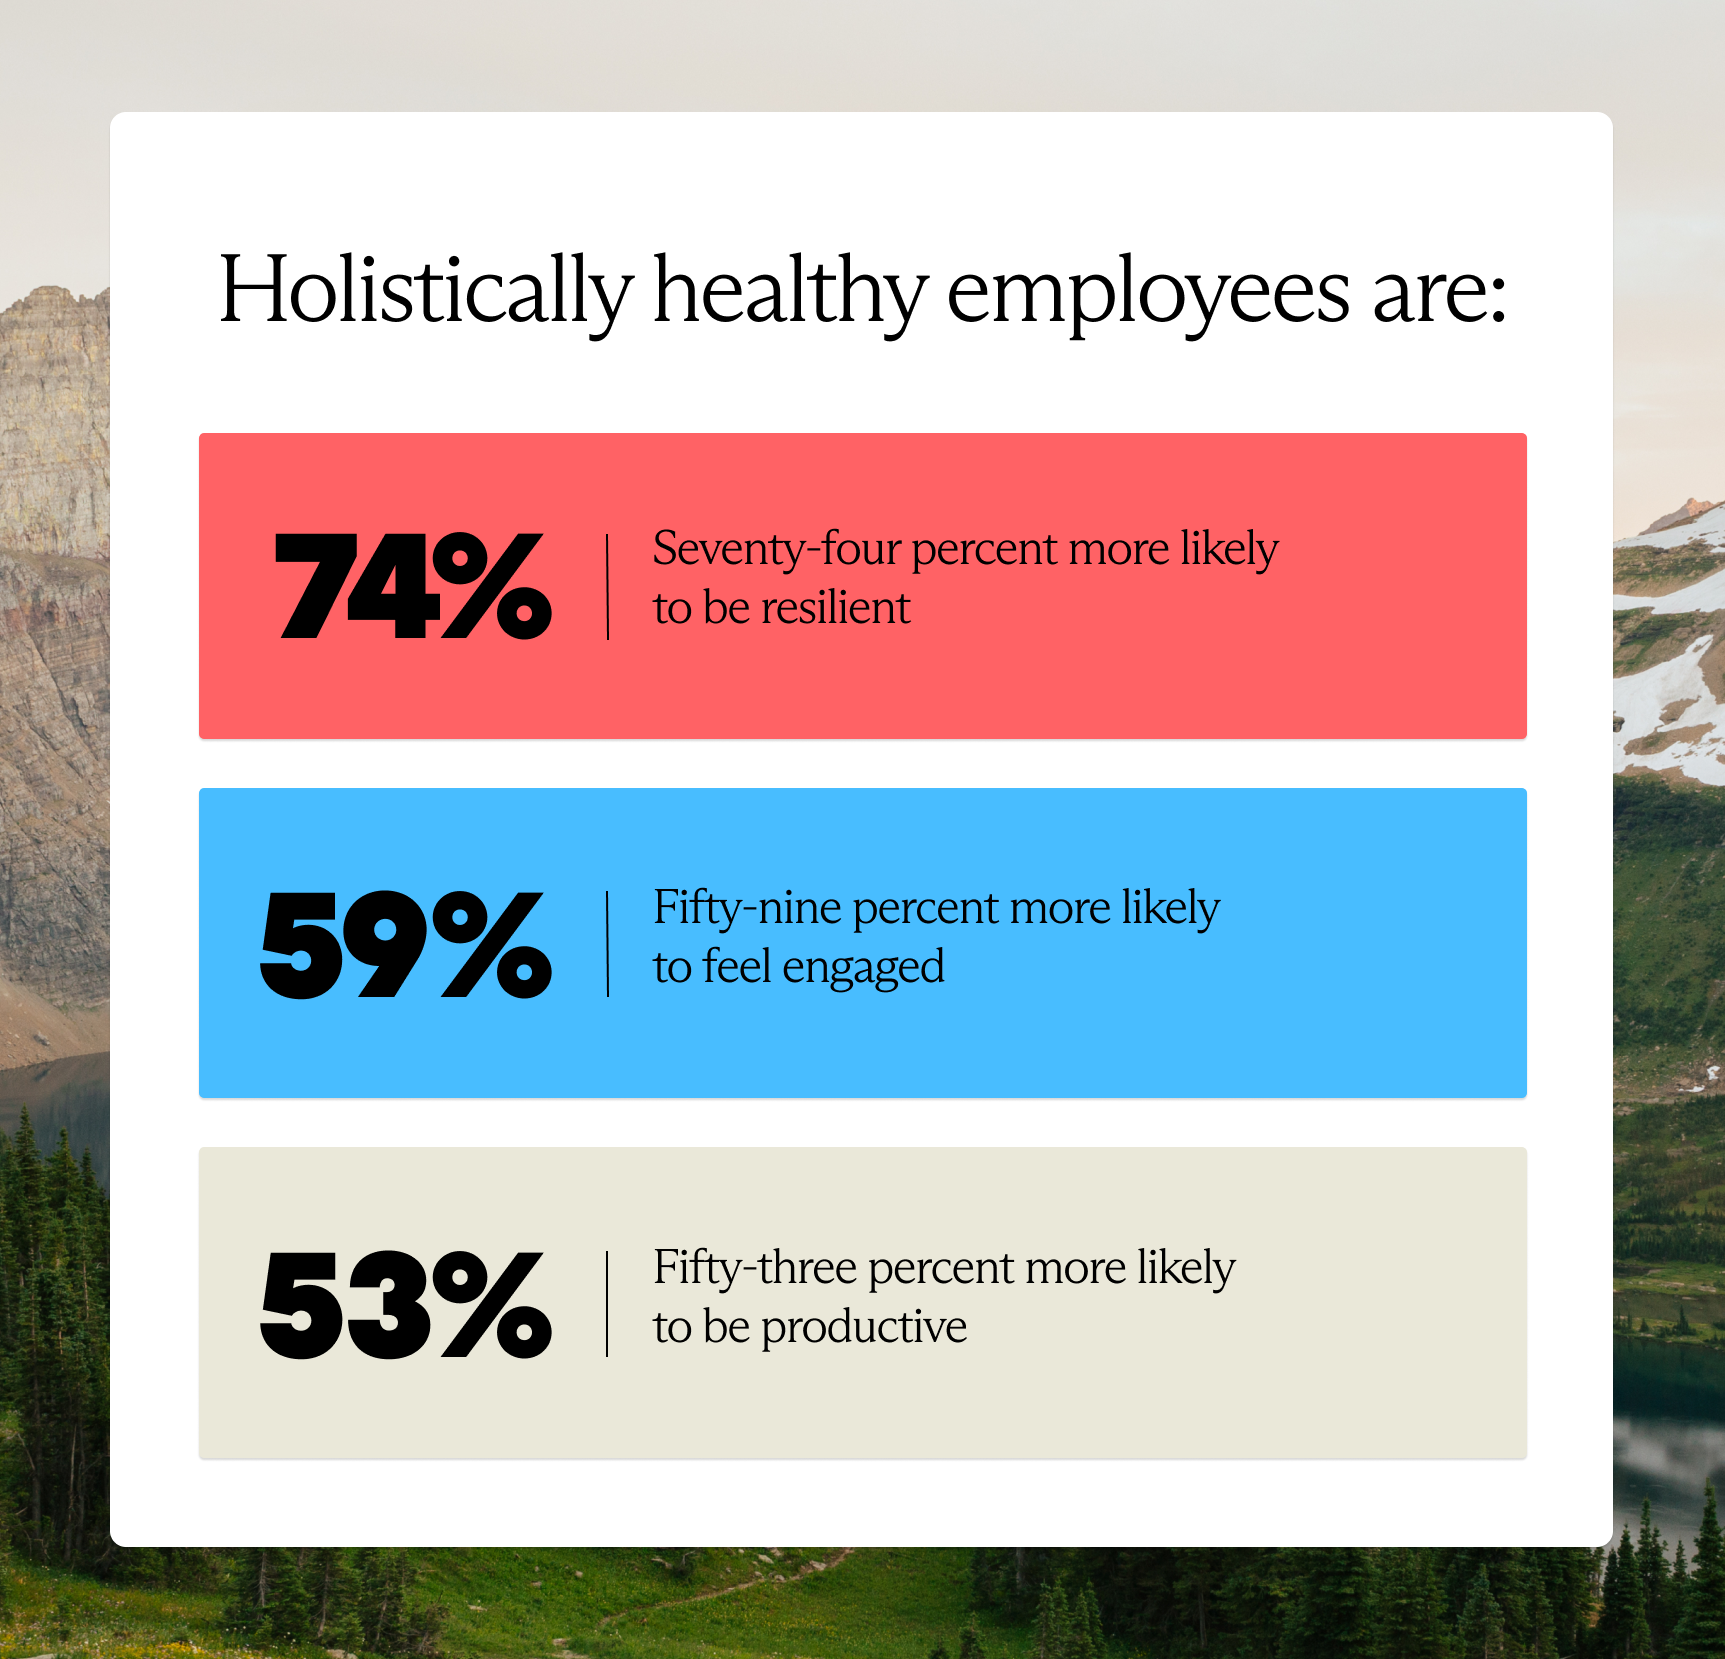 Holistically healthy employees are:  74% more likely to be resilient 59% more likely to feel engaged 53% more likely to be productive